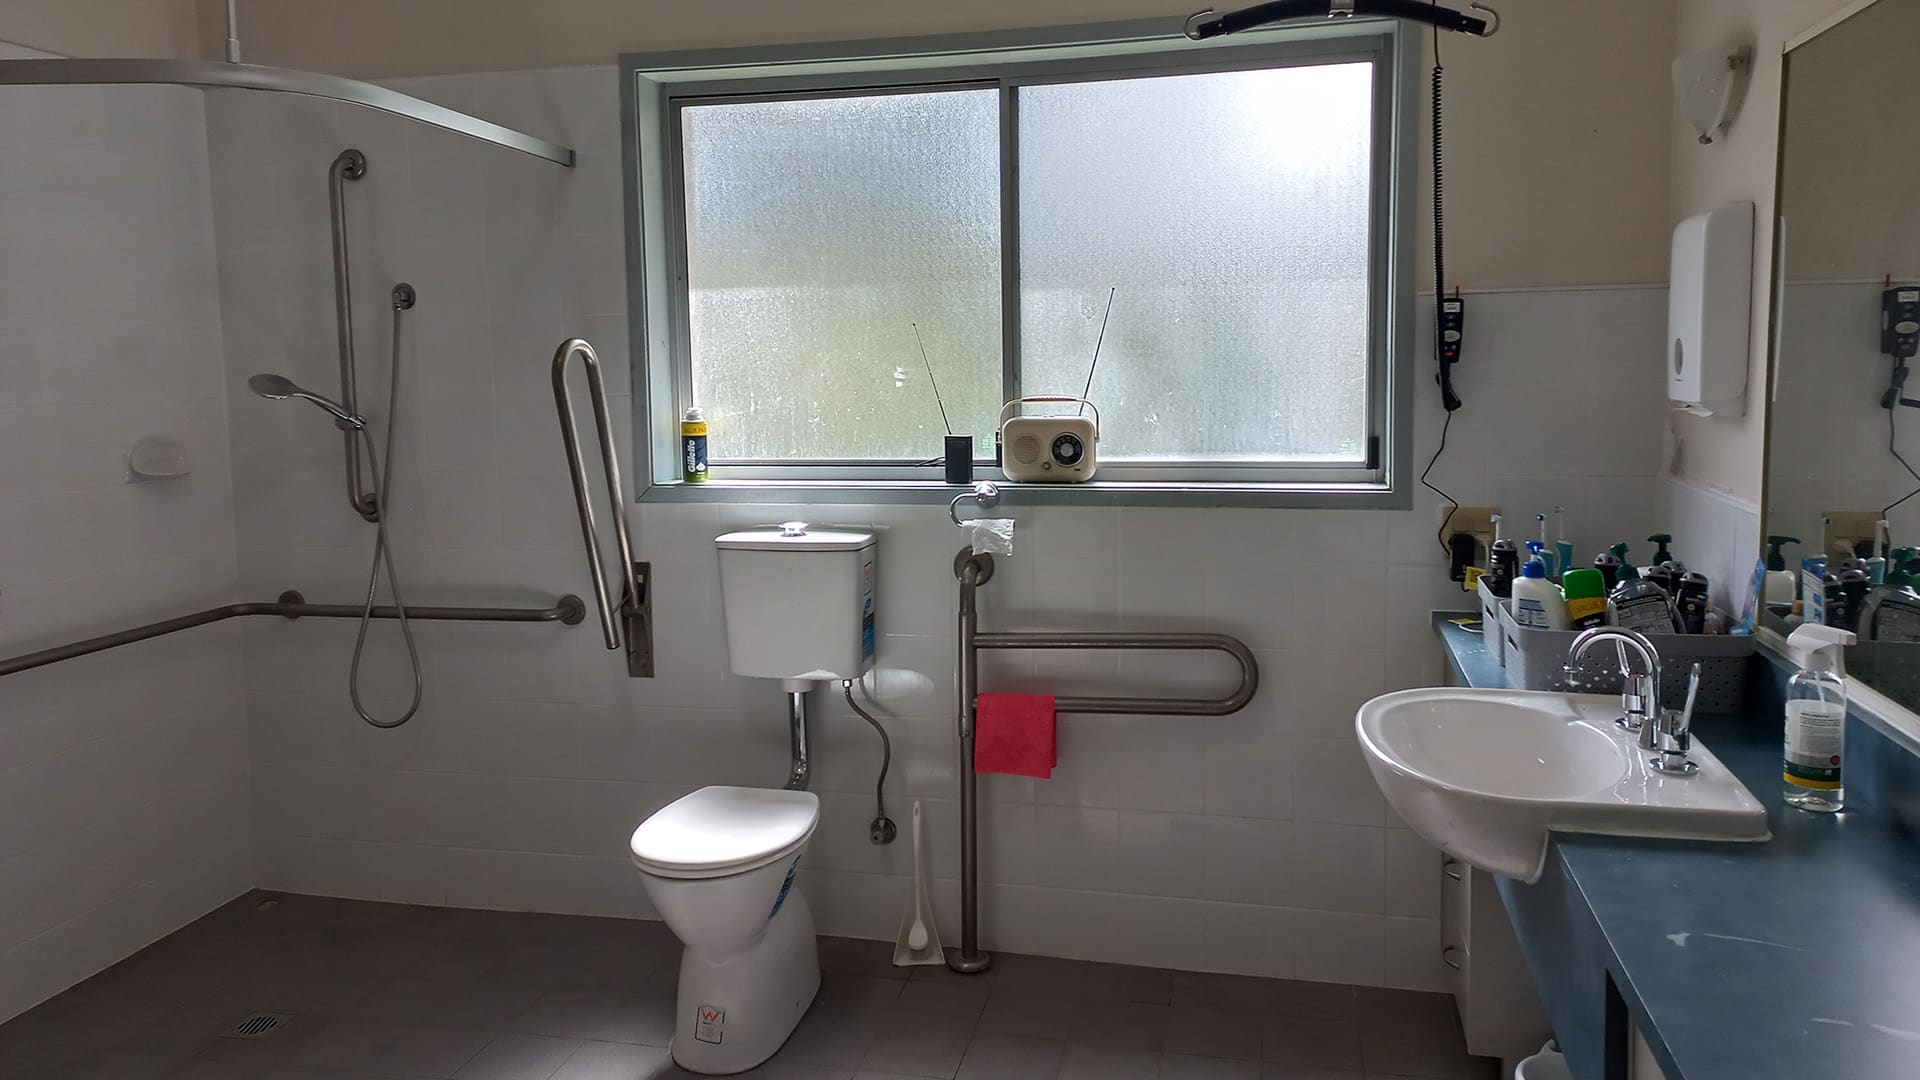 View of the bathroom showing a shower area with handrail, a toilet under a large window and a basin area.